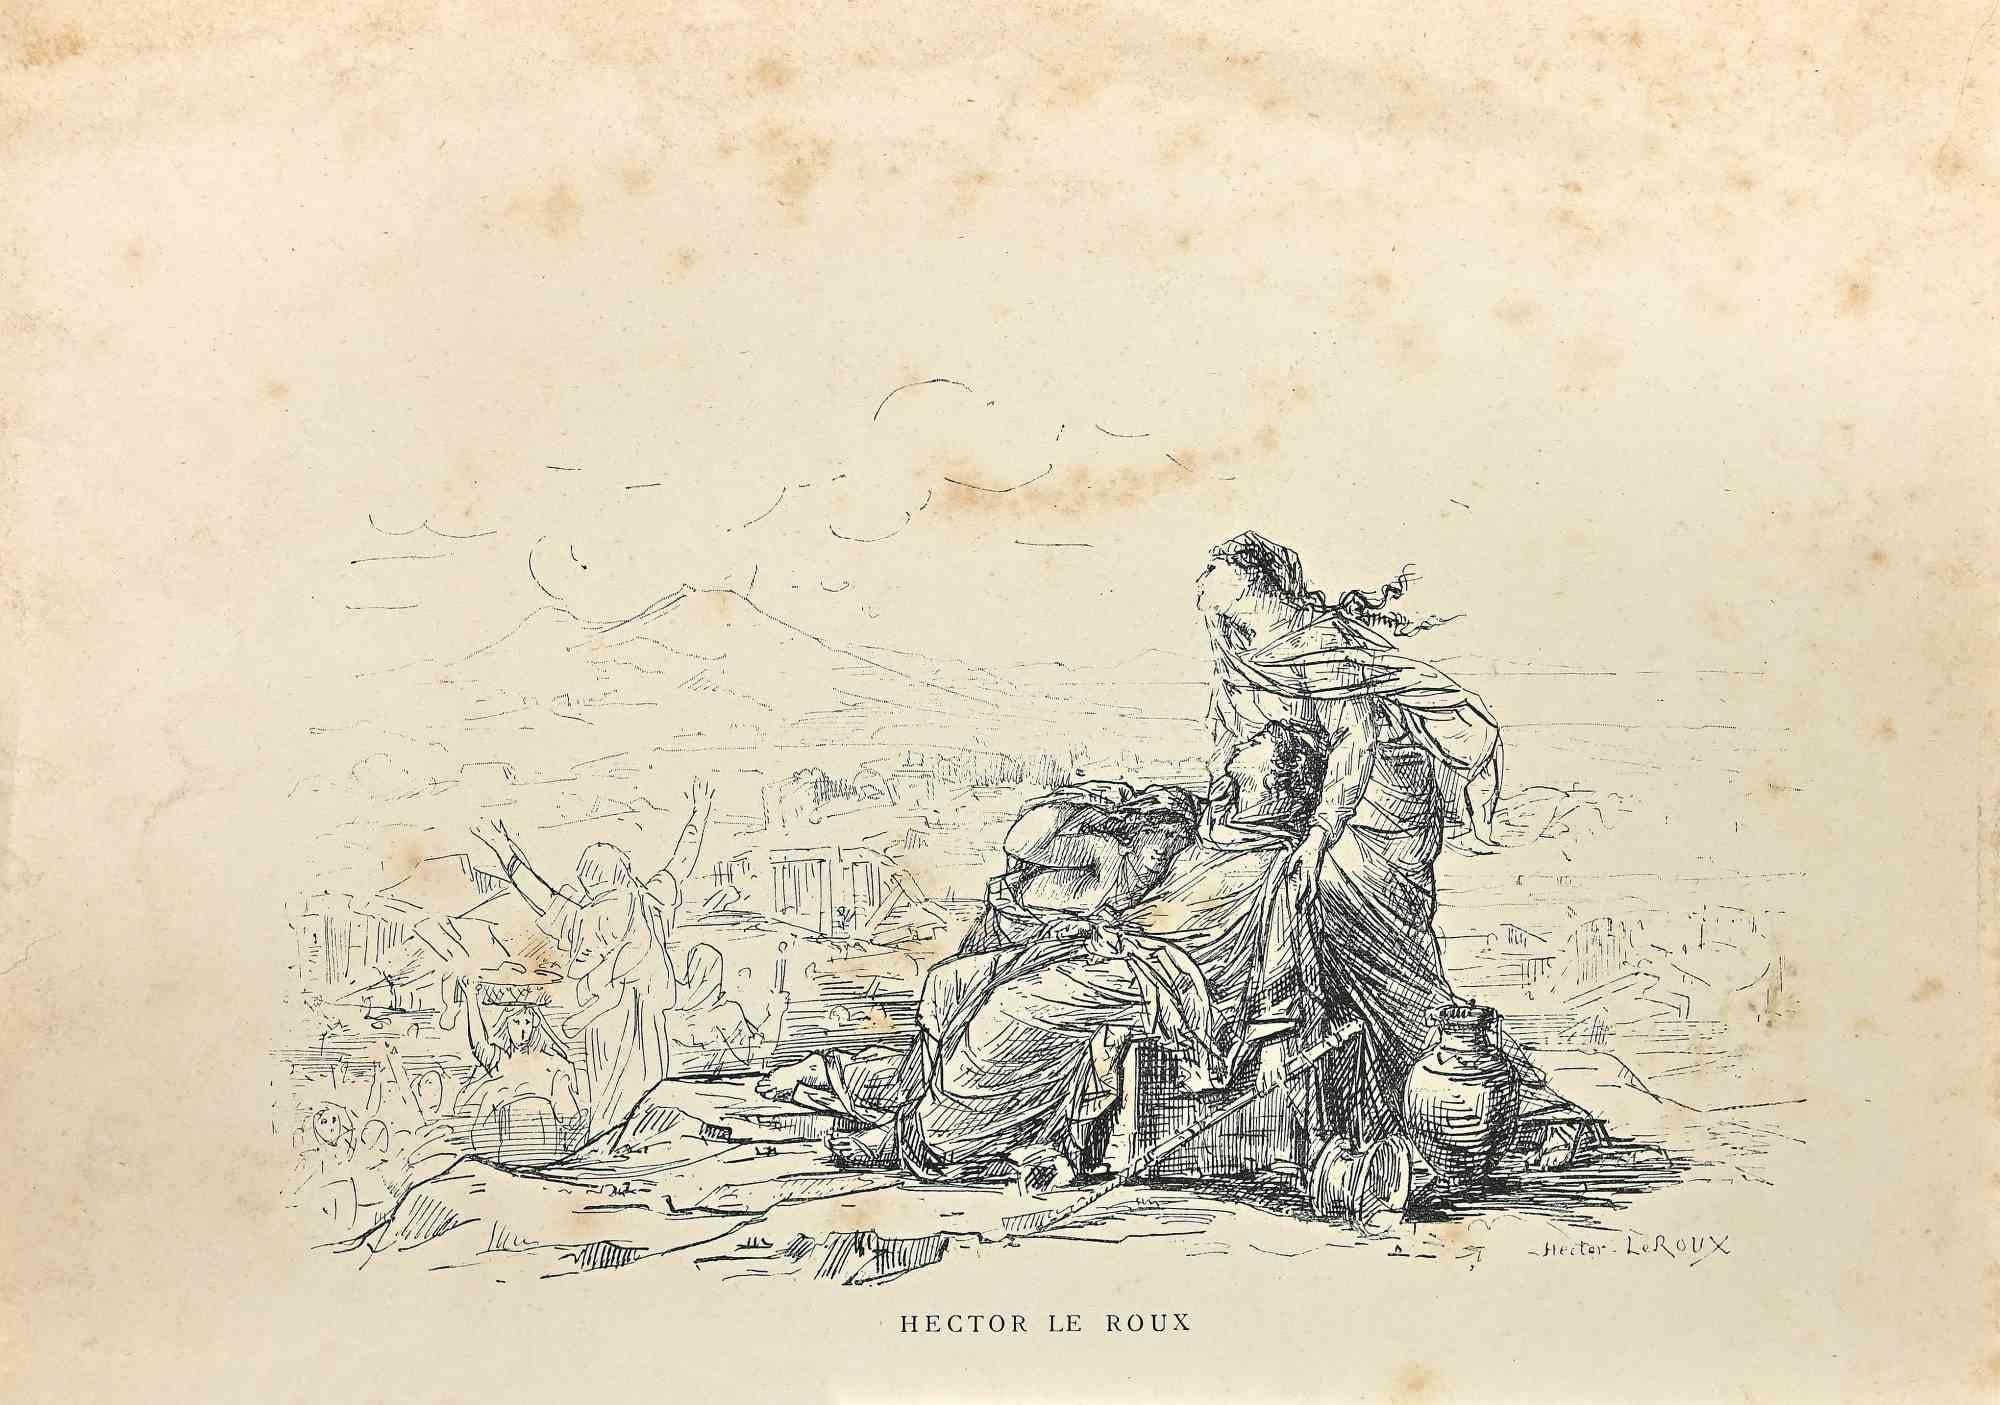 Desolation - Lithograph by Hector Le Roux - Late-19th Century